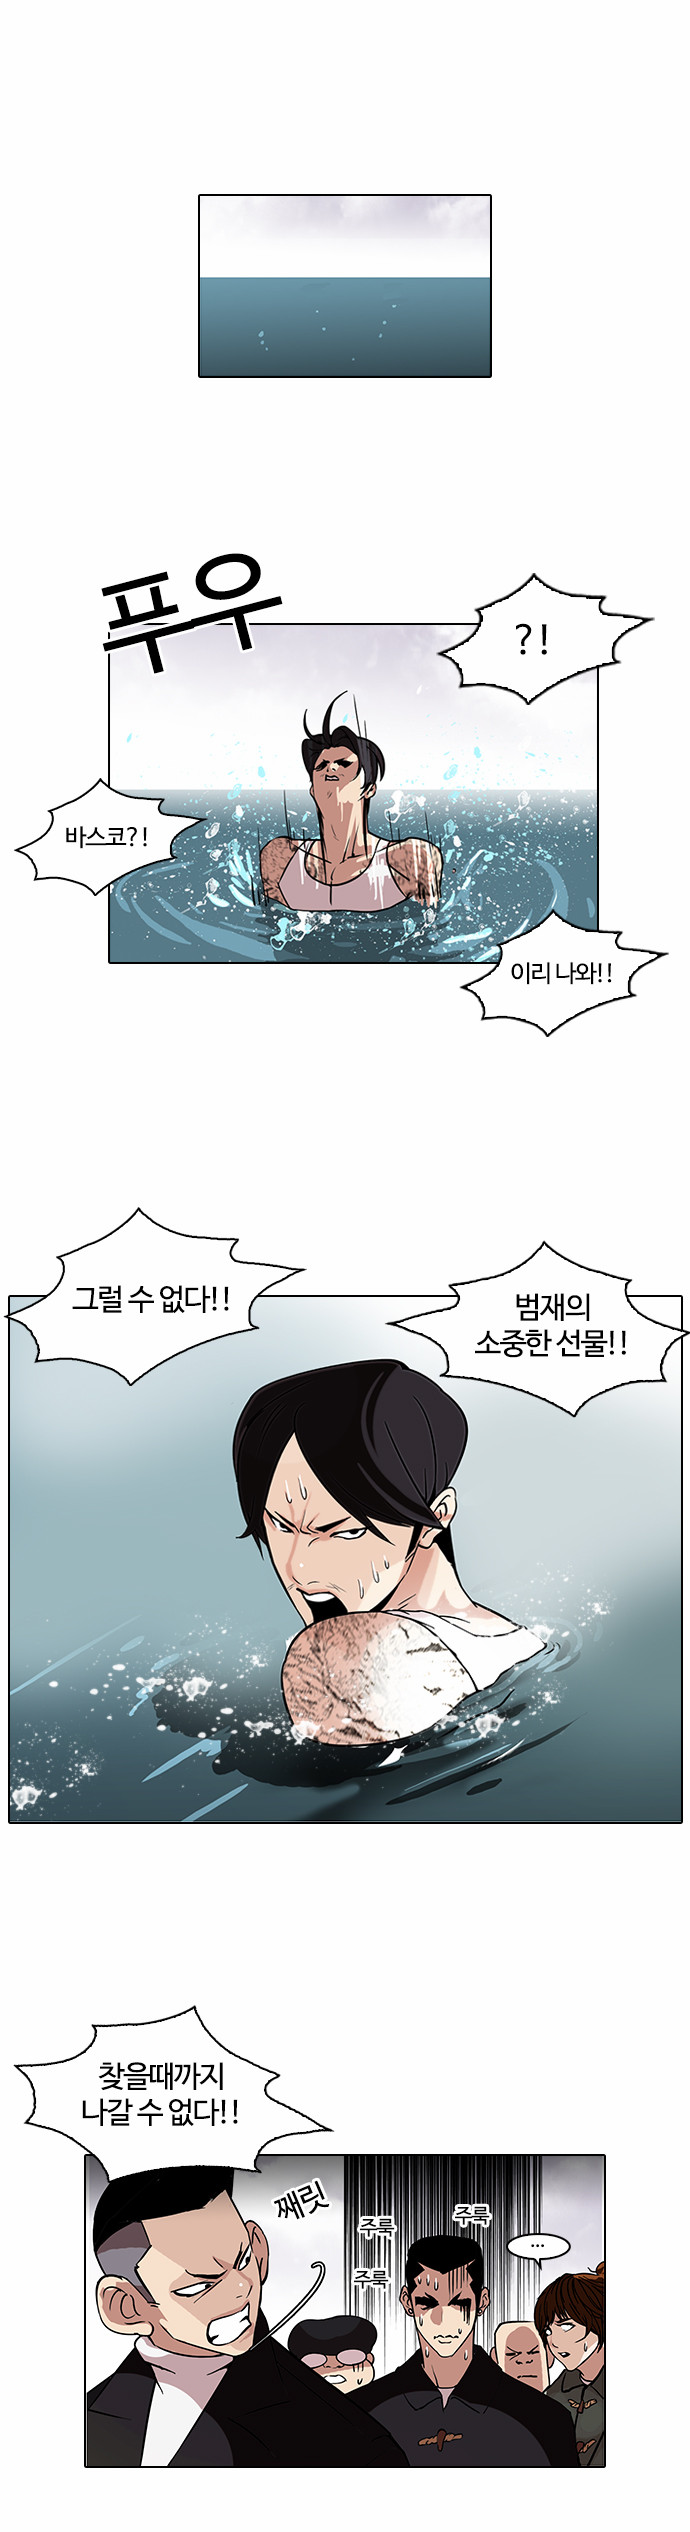 Lookism - Chapter 82 - Page 1